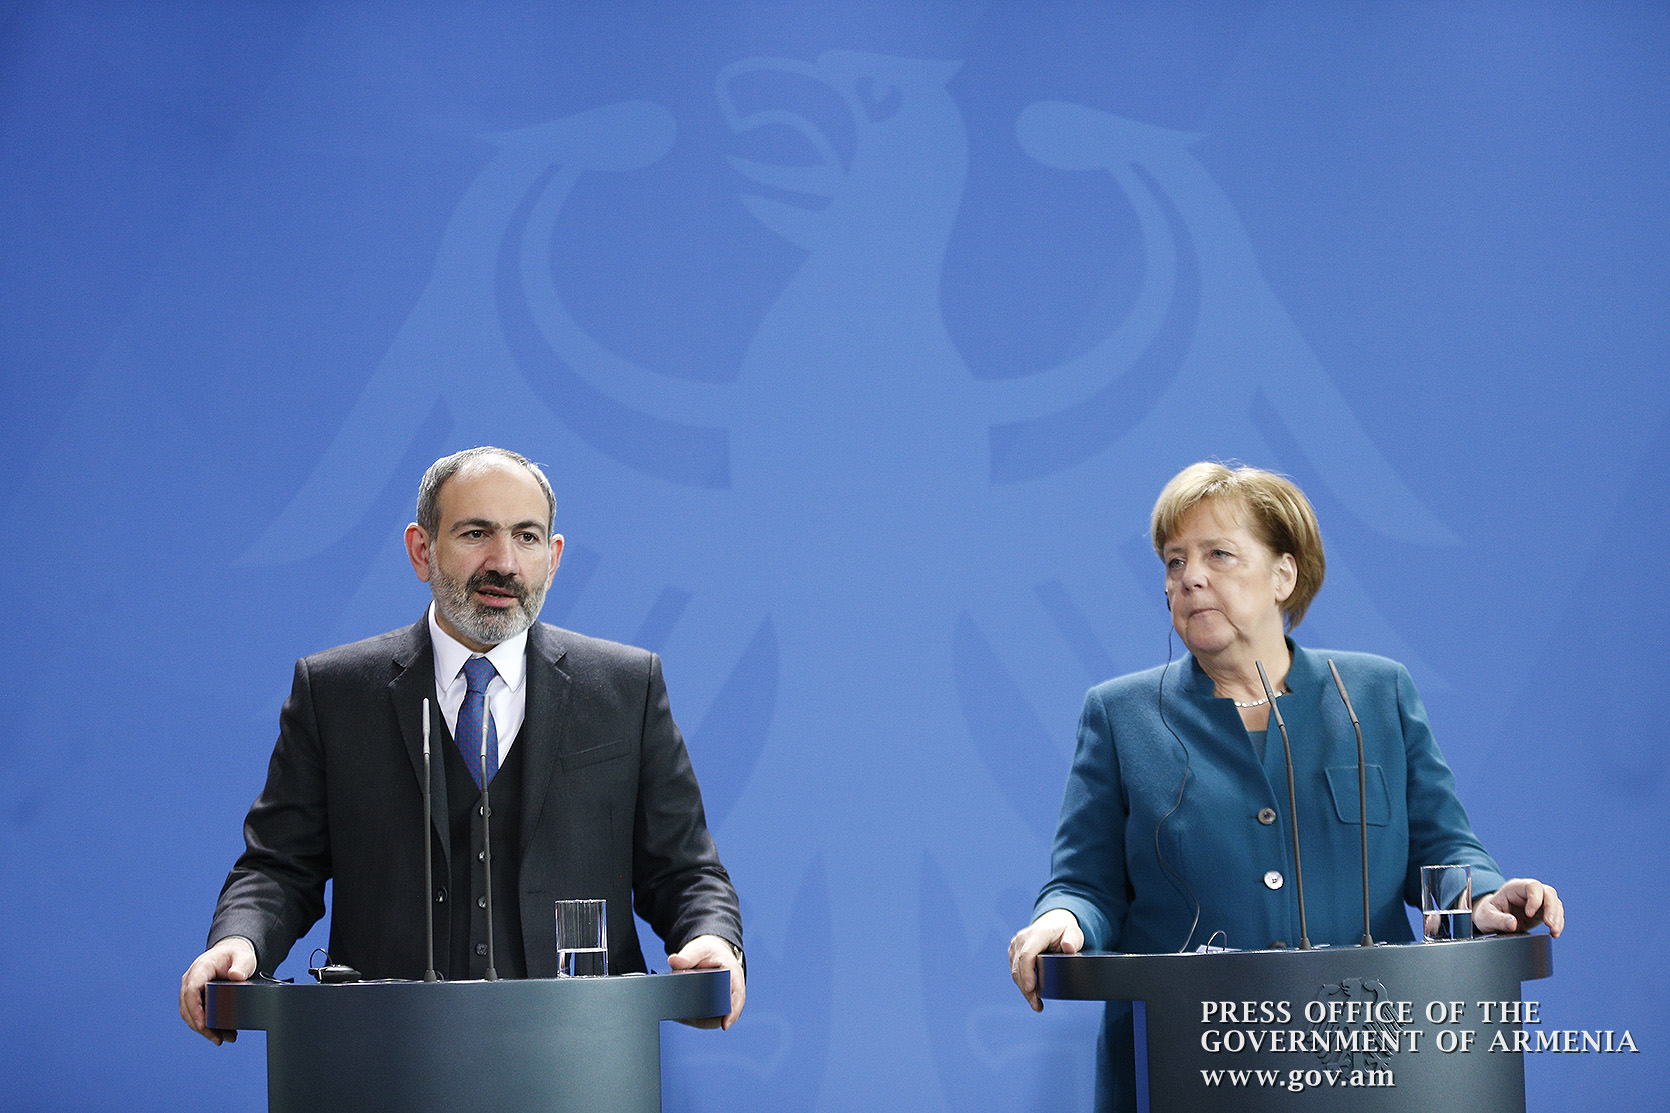 The German Chancellor expressed deep concern over the ongoing tensions